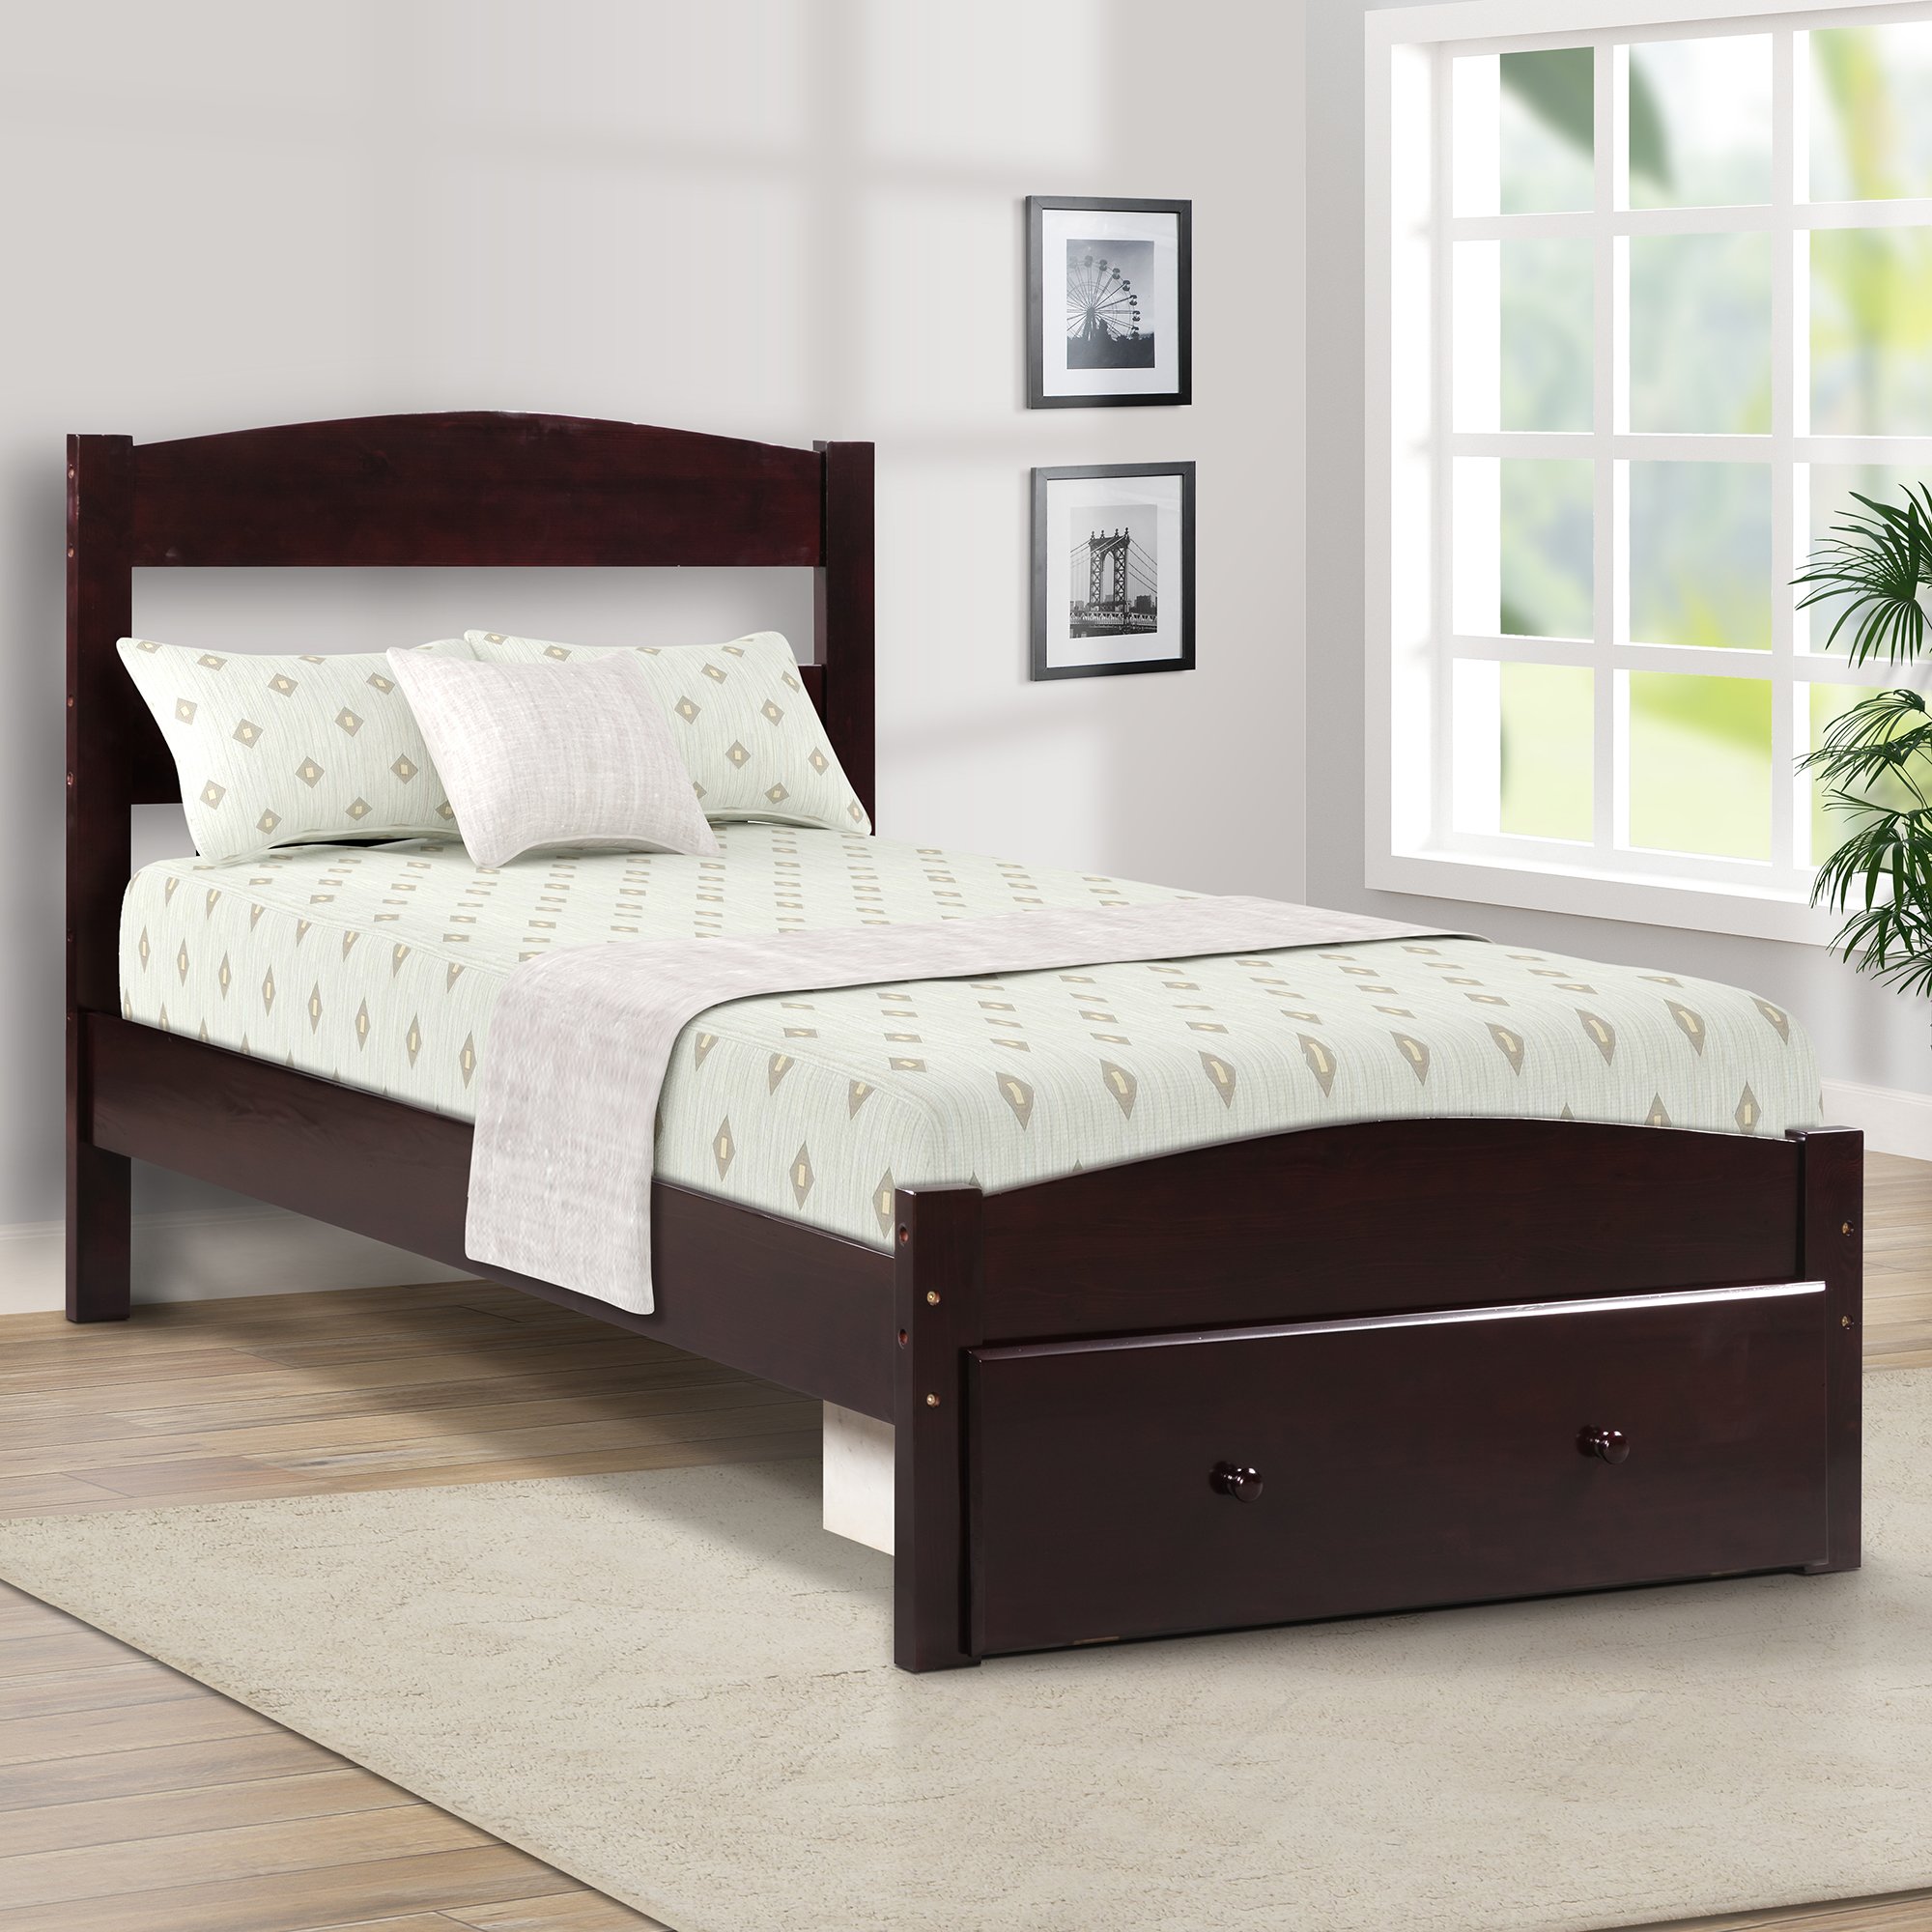 Wood Platform Twin Bed Frame with Storage Drawer and Wood Slat Support